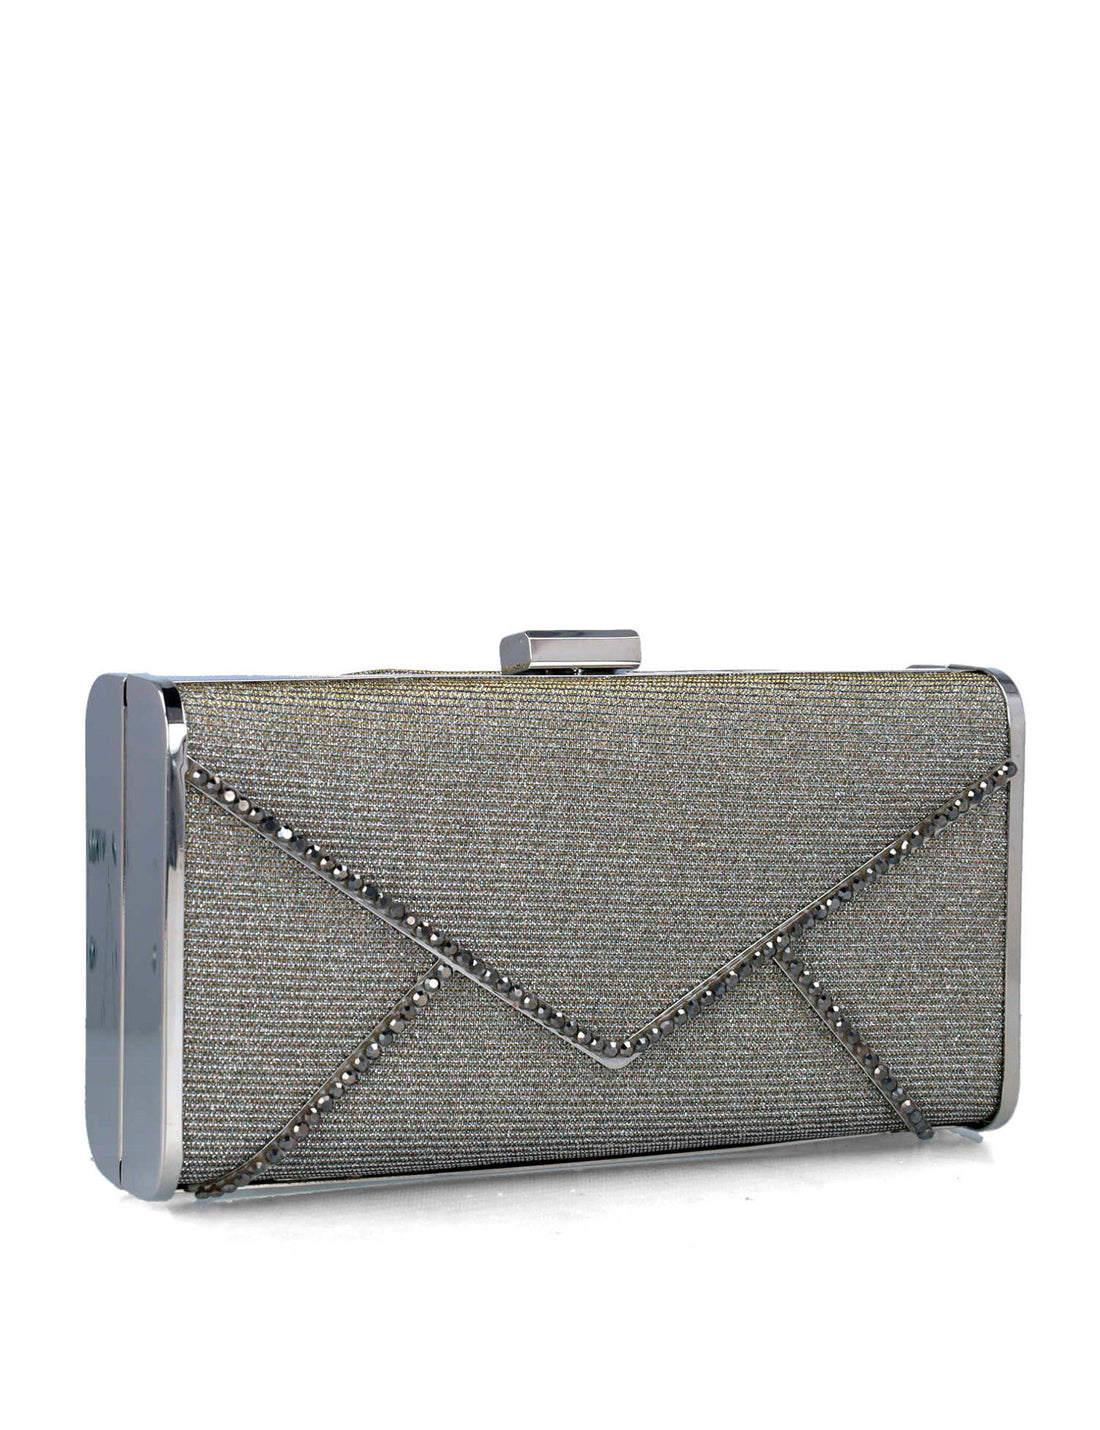 Grey Clutch With Silver Hardware_85656_71_02